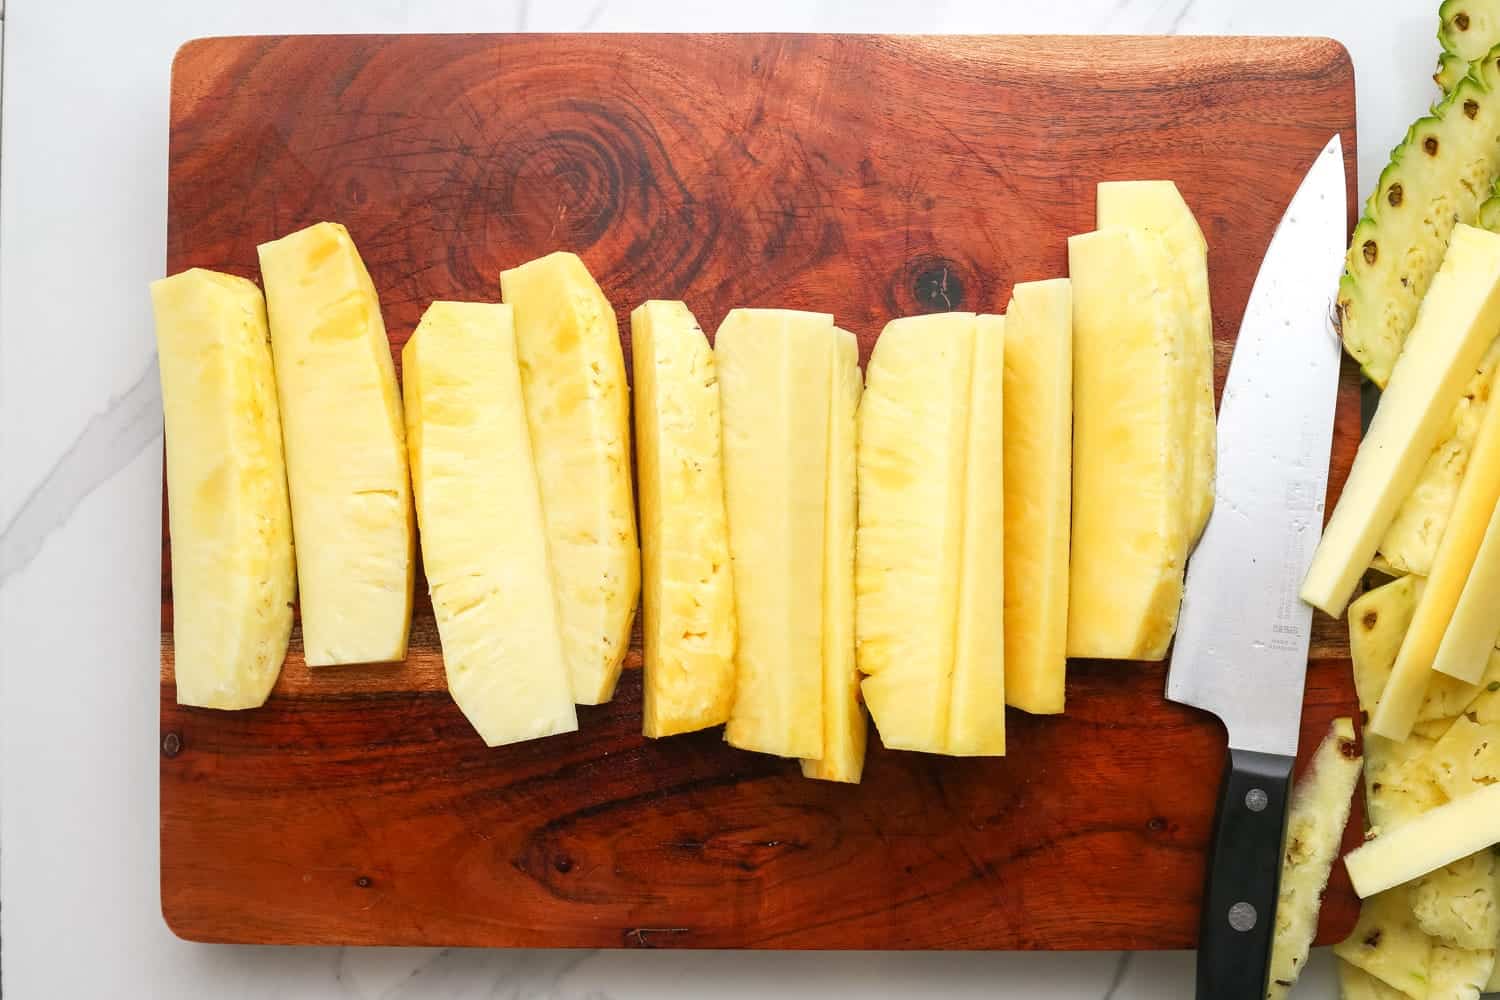 Sliced pineapple into spears on a cutting board, with a chef's knife on the side.